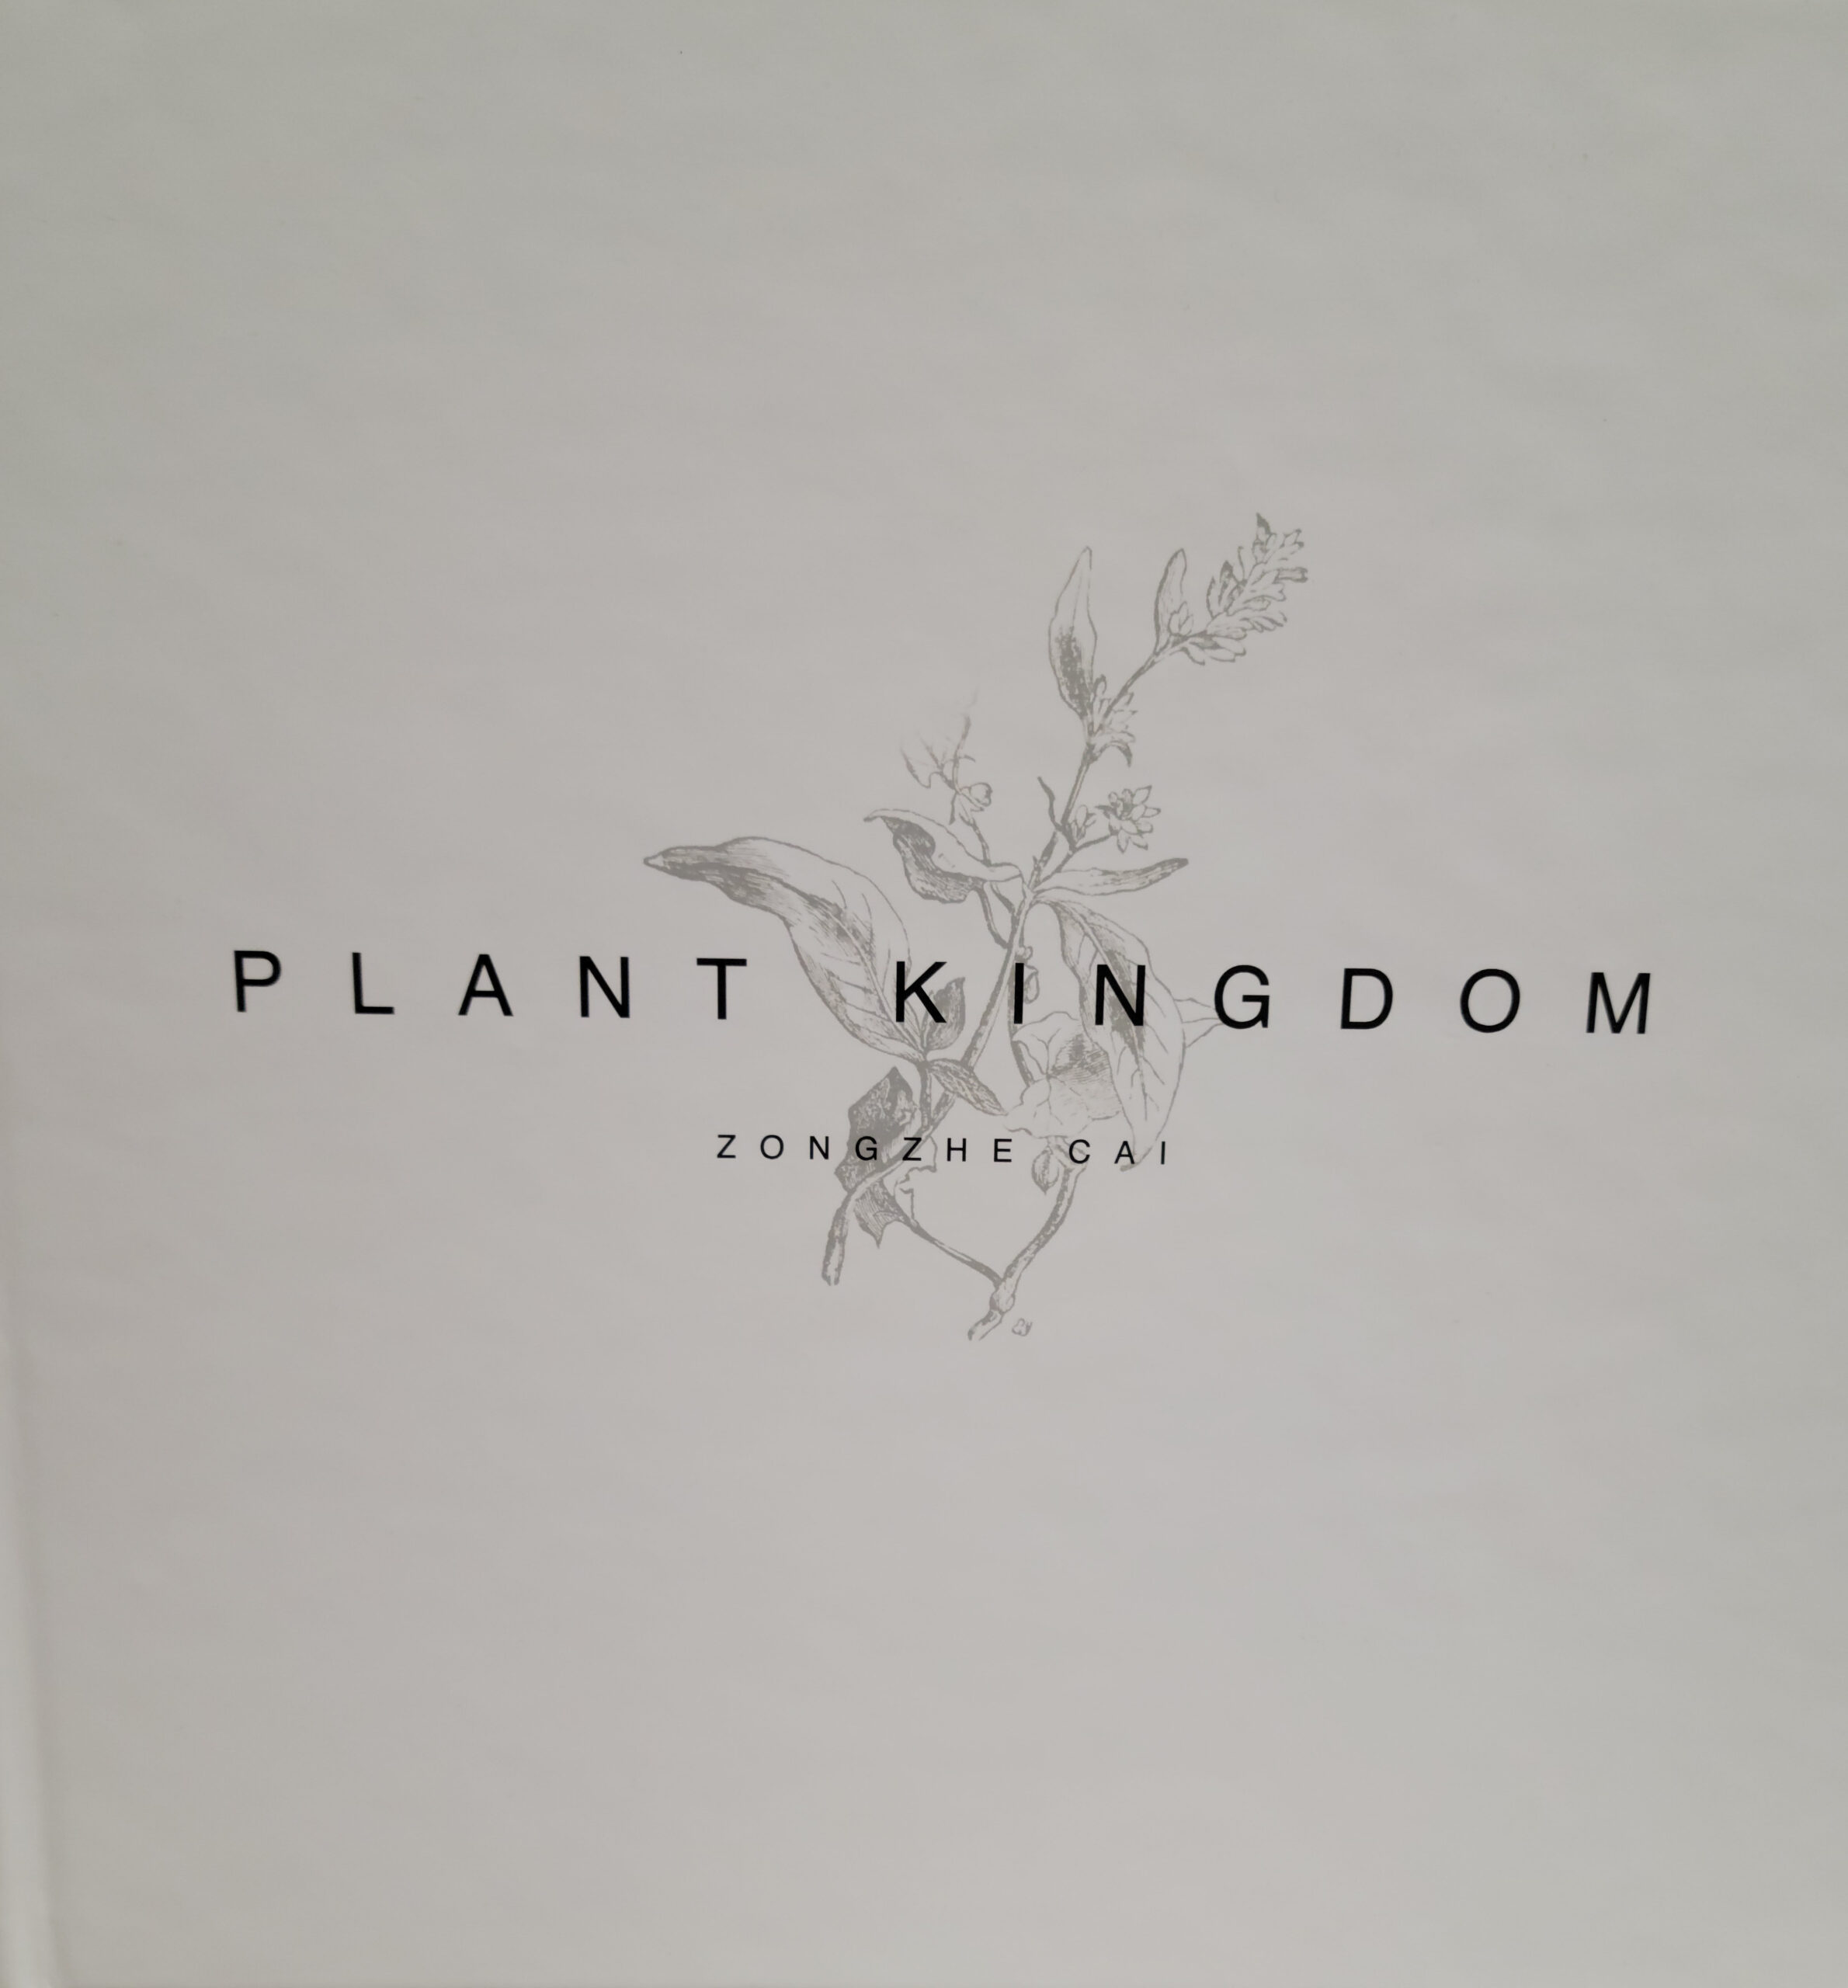 Photograph of front cover of book Plant Kingdom by Zongzhe Cai